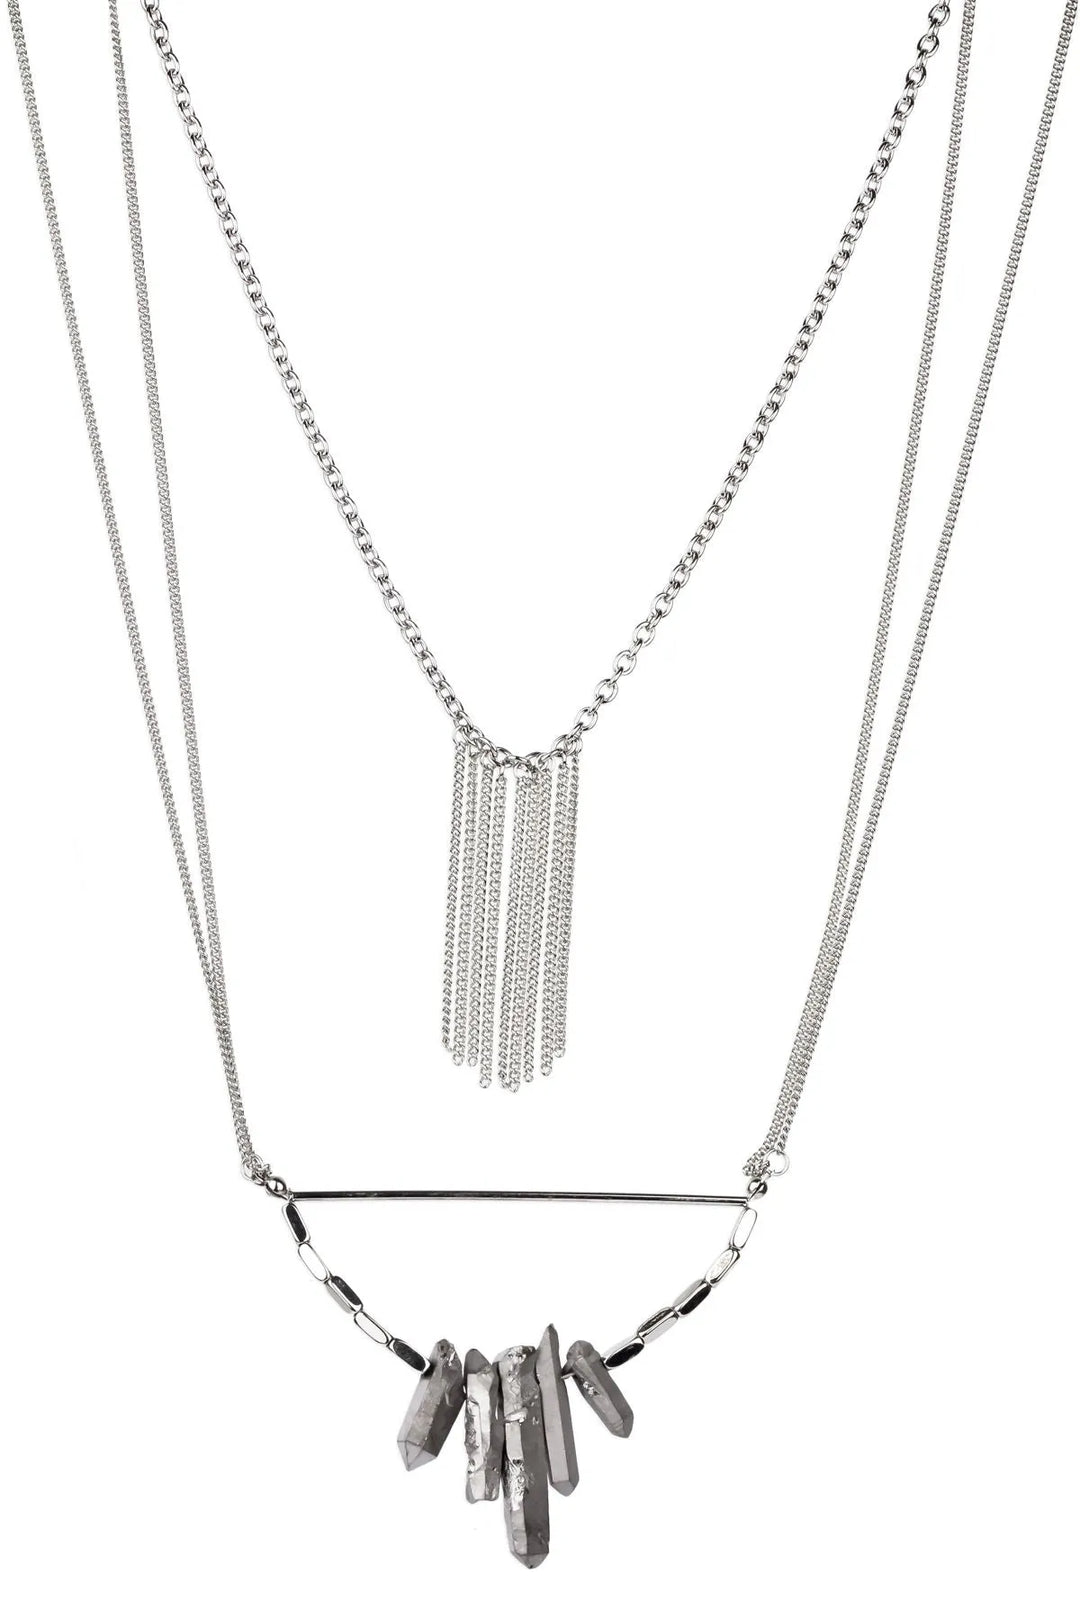 Boho Layered Chain Necklace Silver